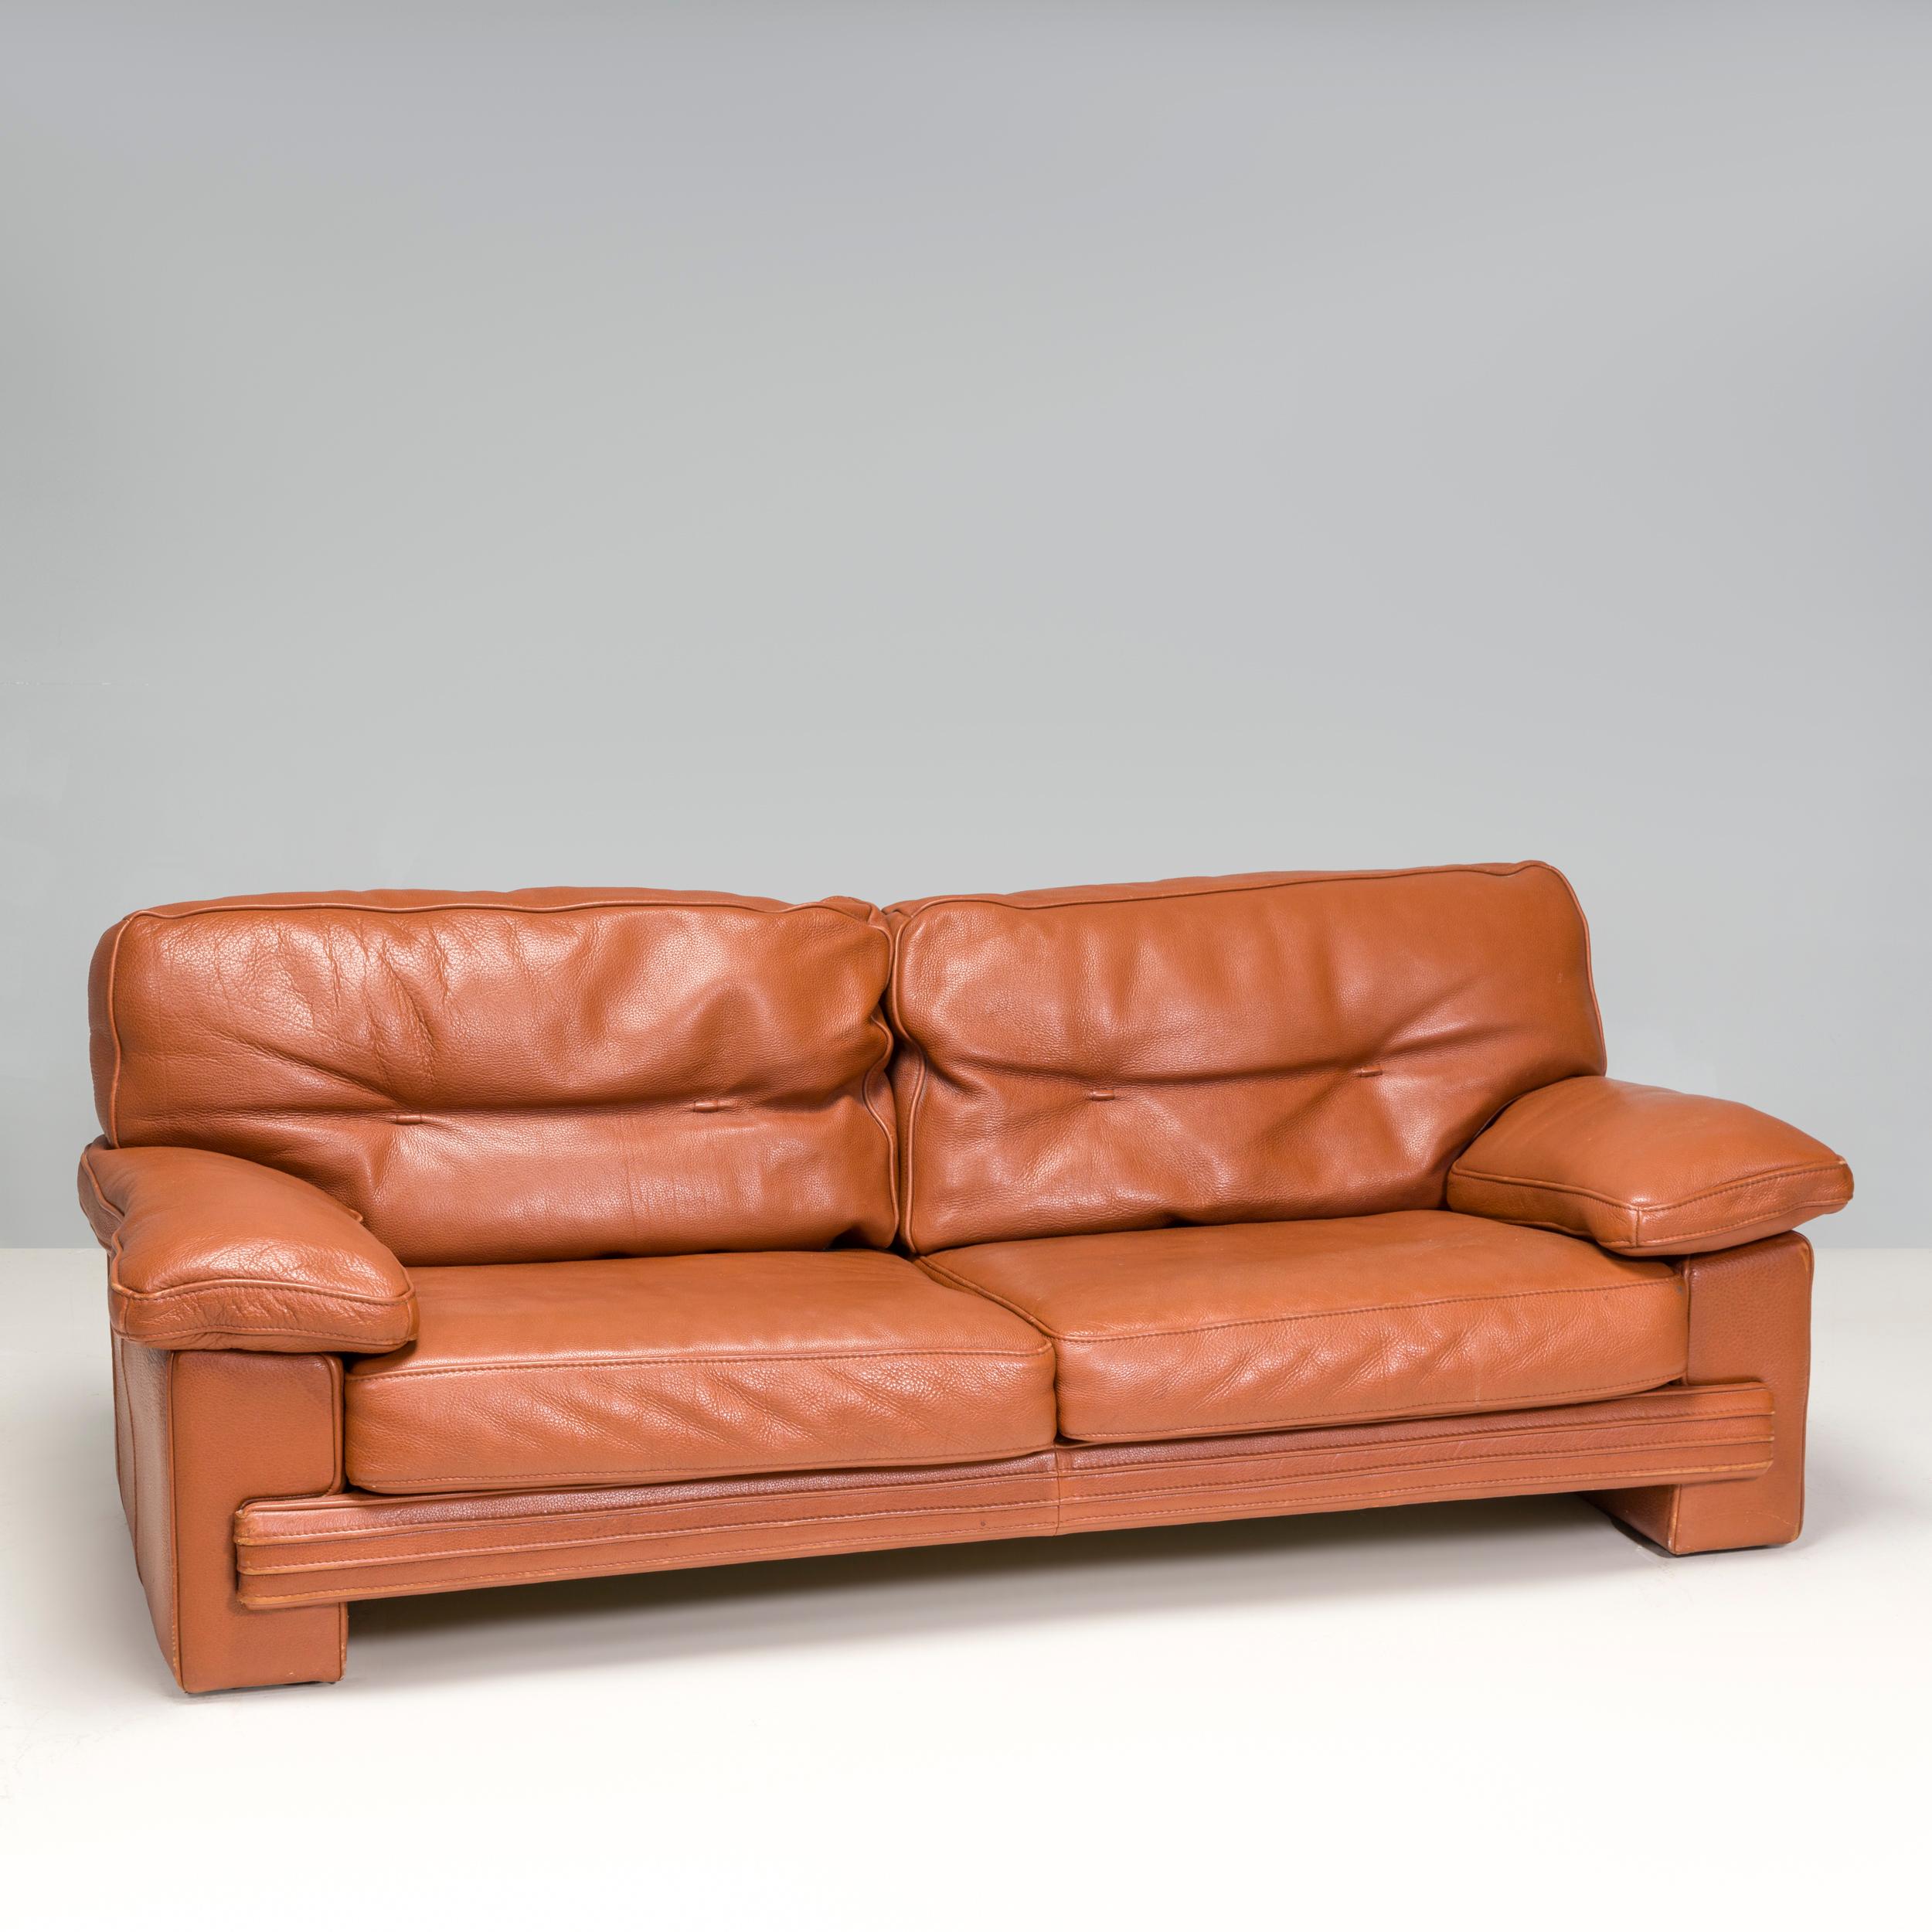 Designed and manufactured by Roche Bobois, this sofa is the perfect balance of comfort and style. The two seat cushions, two back cushions and two arm cushions are upholstered in leather. The sofa could fit a variety of interior aesthetics; the